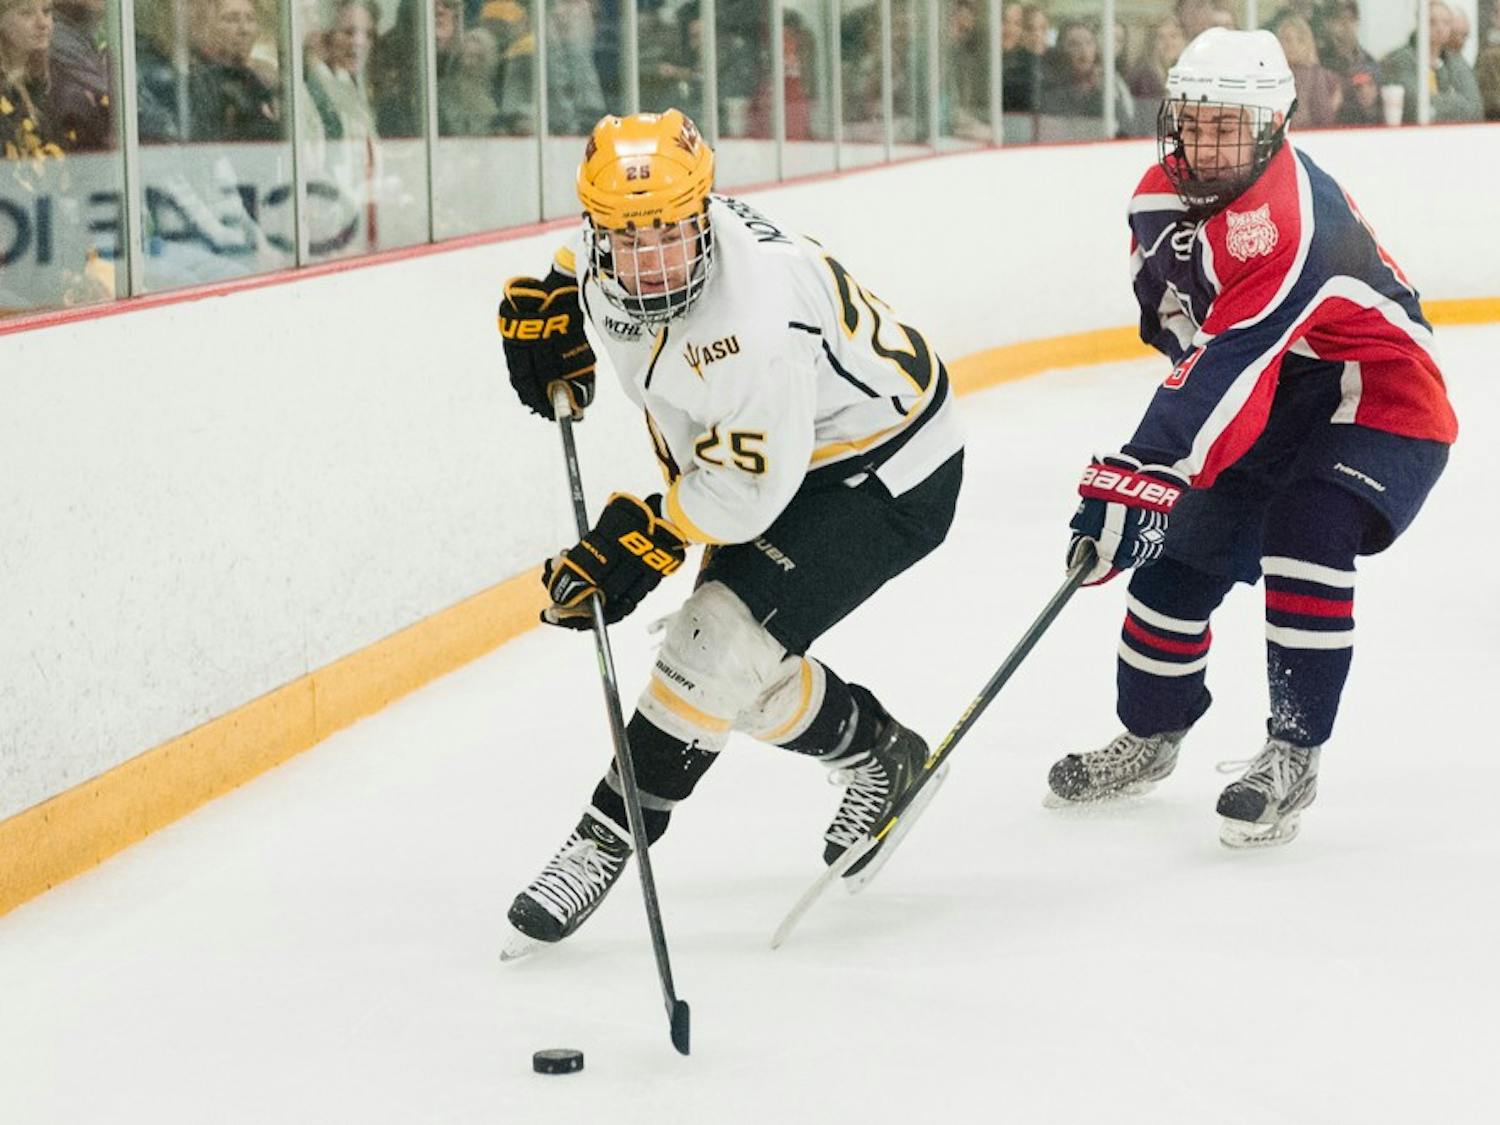 Senior forward Liam Norris skates with the puck in a game against Arizona on Saturday, Jan. 31, 2015, at Oceanside Ice Arena in Tempe. The Sun Devils defeated the Wildcats 7-2.